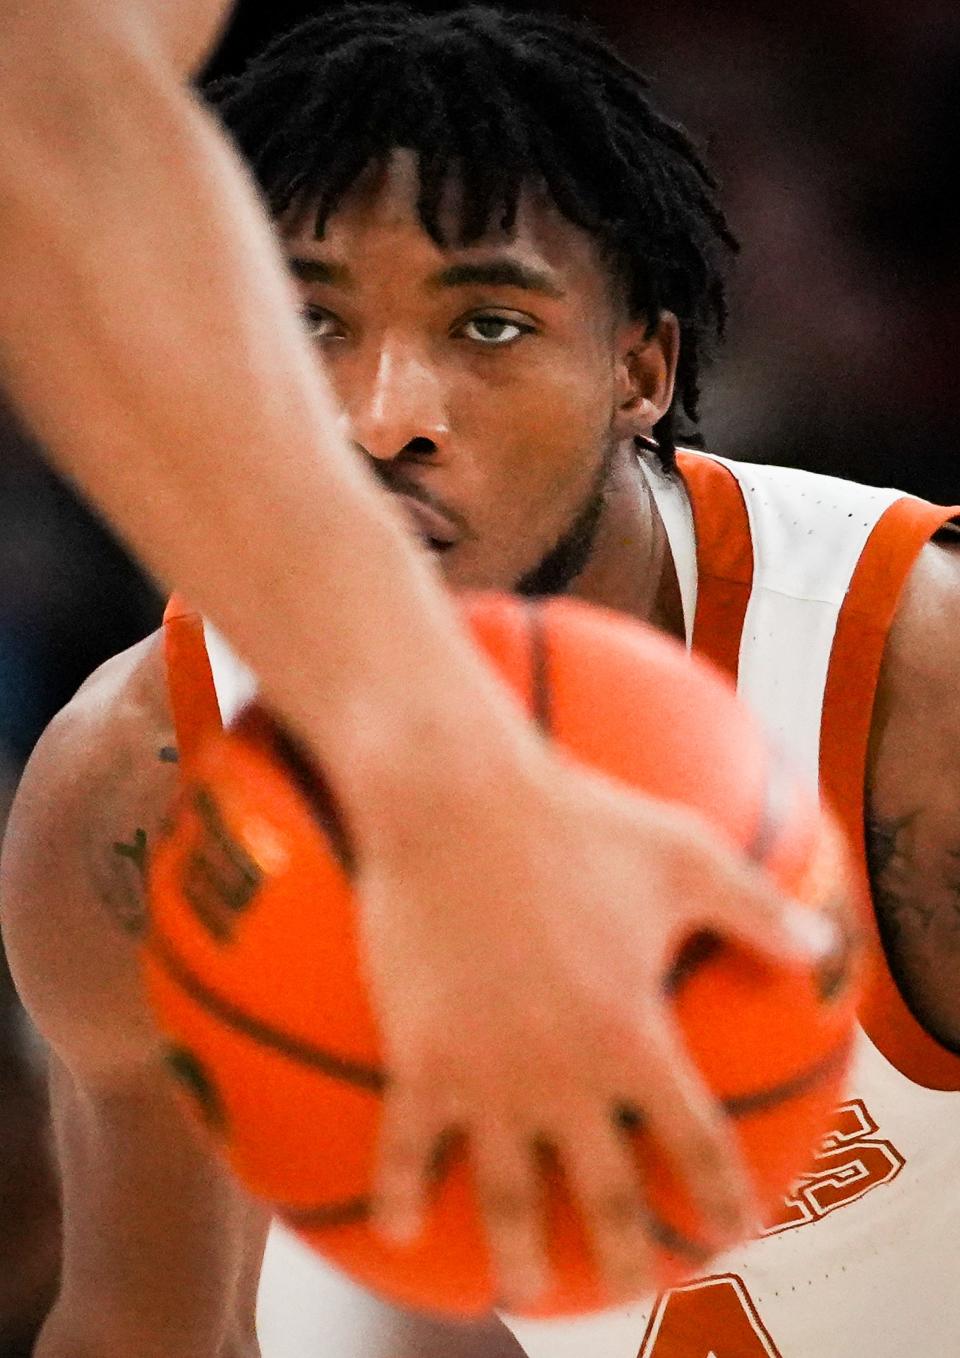 Texas guard Tyrese Hunter watches the ball while defending in the Longhorns' 75-73 win over Baylor on Saturday. Hunter broke out a brief scoring slump against Baylor, which bodes well for the Longhorns during its trip to Oklahoma on Tuesday.